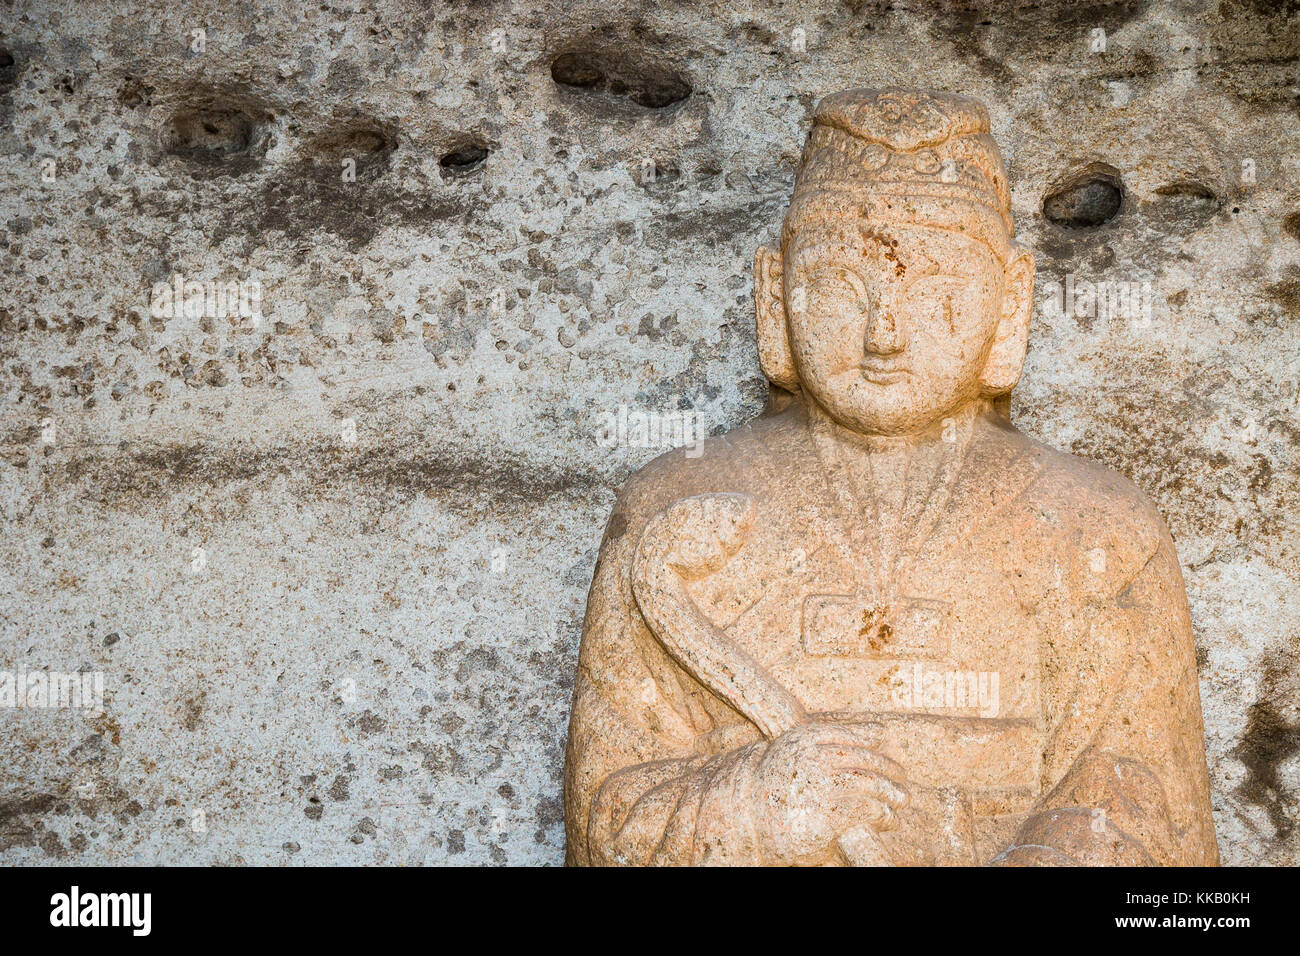 A sculpture of  Buddha carved into a beige colored stone Stock Photo